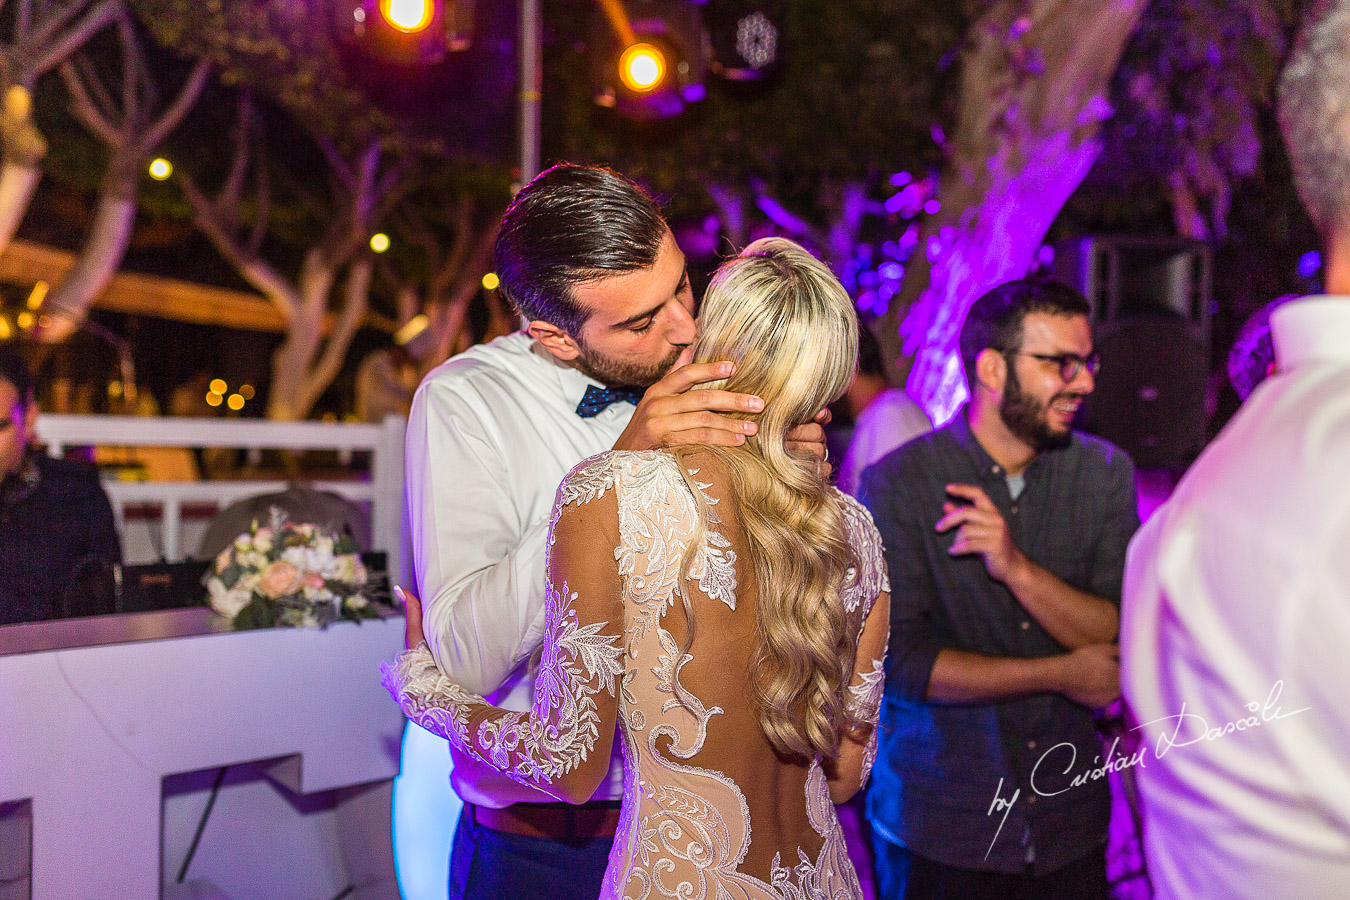 Moments captured during the first dance at an elegant and romantic wedding at Elias Beach Hotel by Cristian Dascalu.